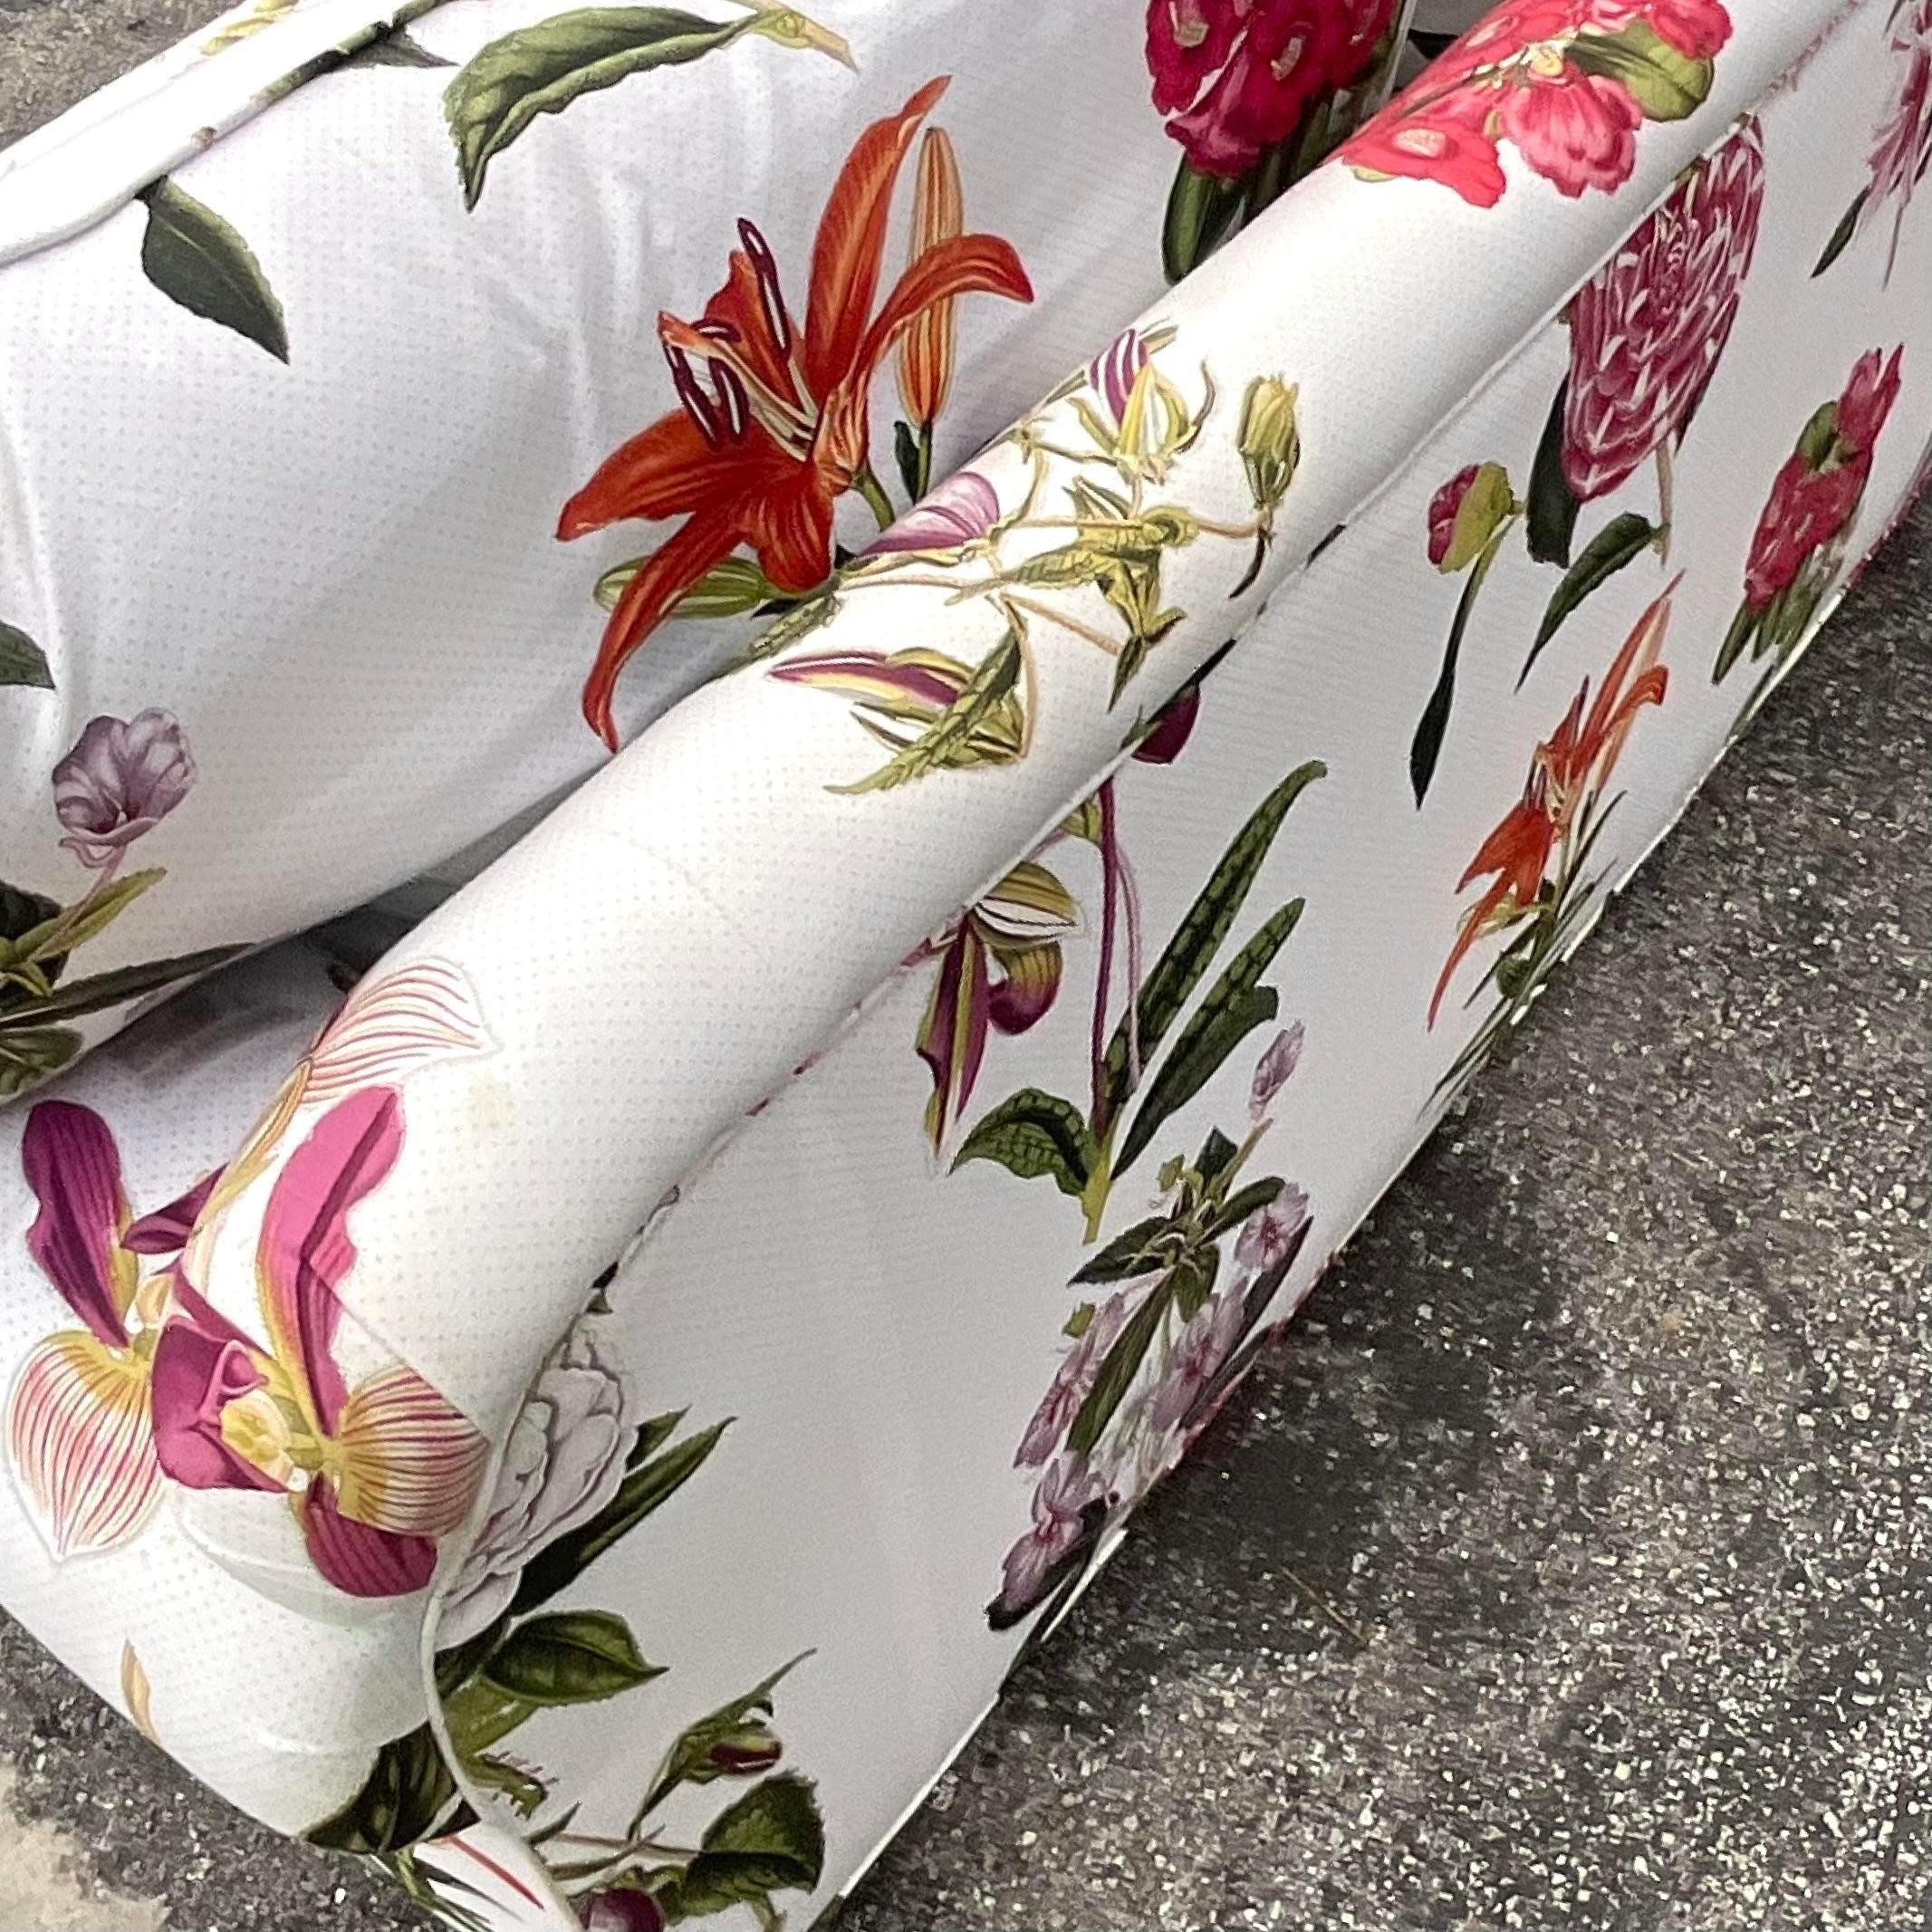 A fabulous vintage Regency loveseat. A chic printed floral in brilliant colors. A bright white for ground on a cotton jacquard. Coordinating pieces also available in the same print. Acquired from a Palm Beach estate.